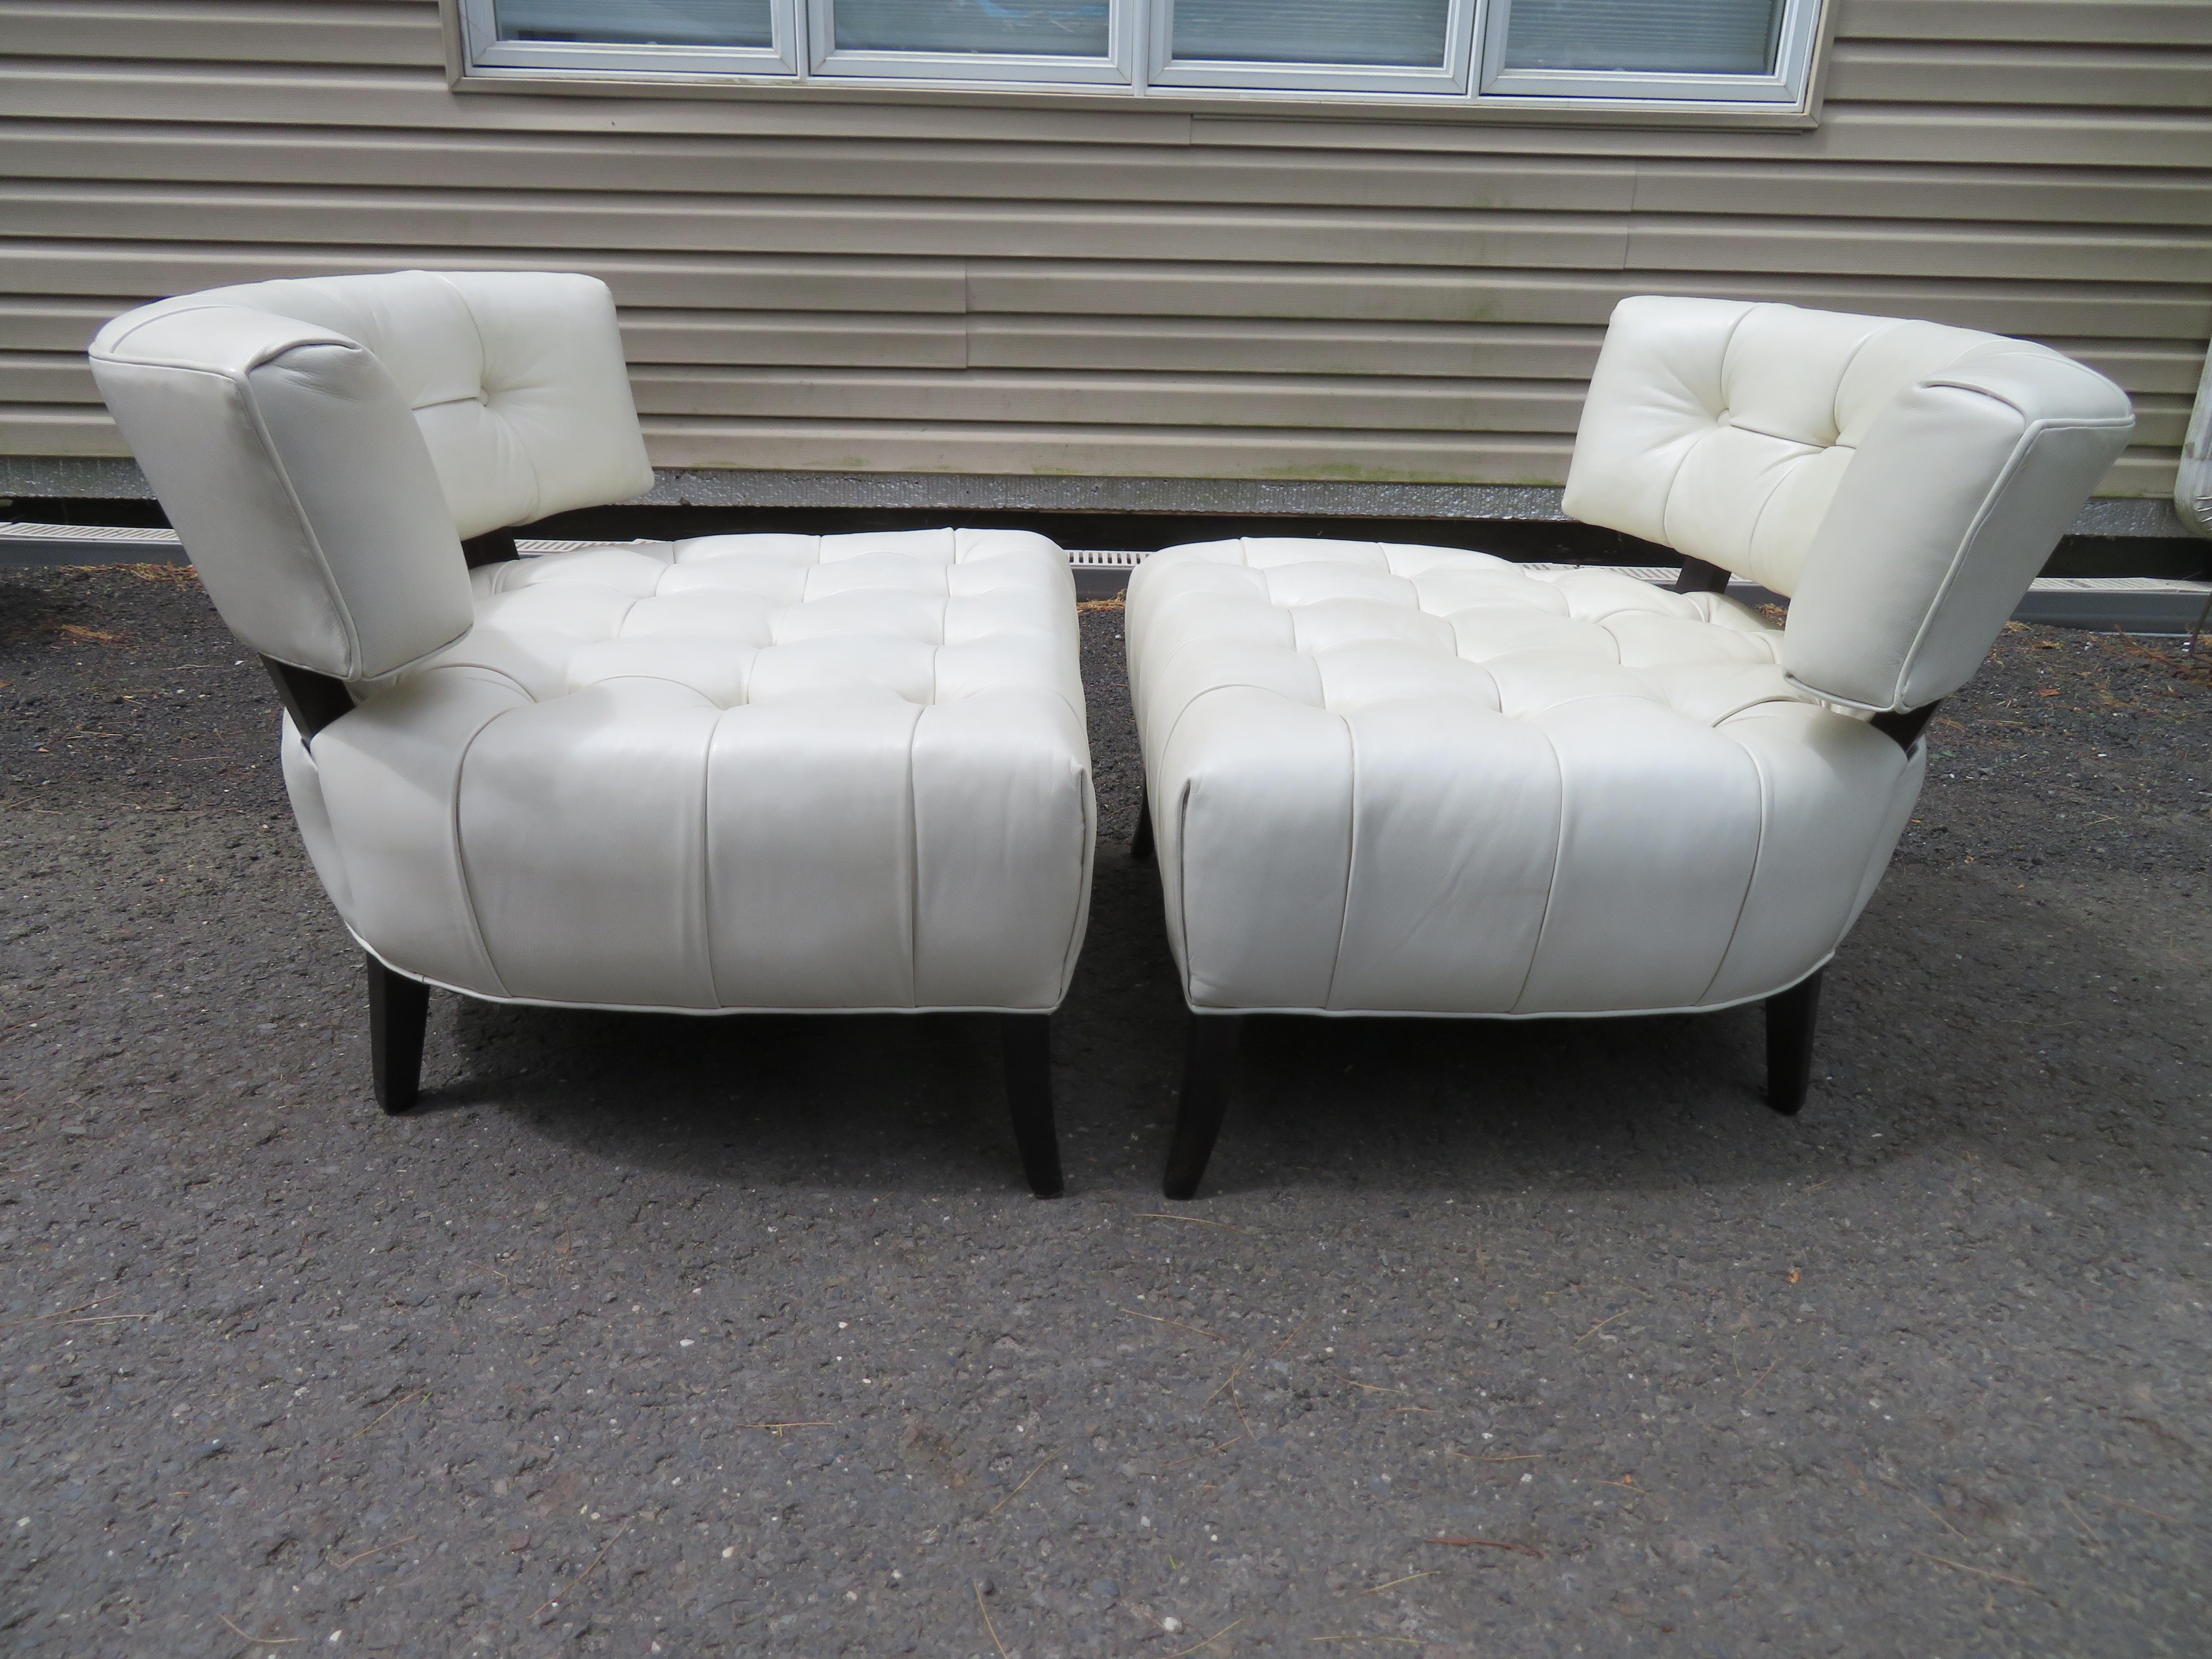 Magnificent pair of Billy Haines style Biscuit tufted slipper chairs. These chairs are upholstered in a lovely high grade creamy white leather and look amazing. They measure 28